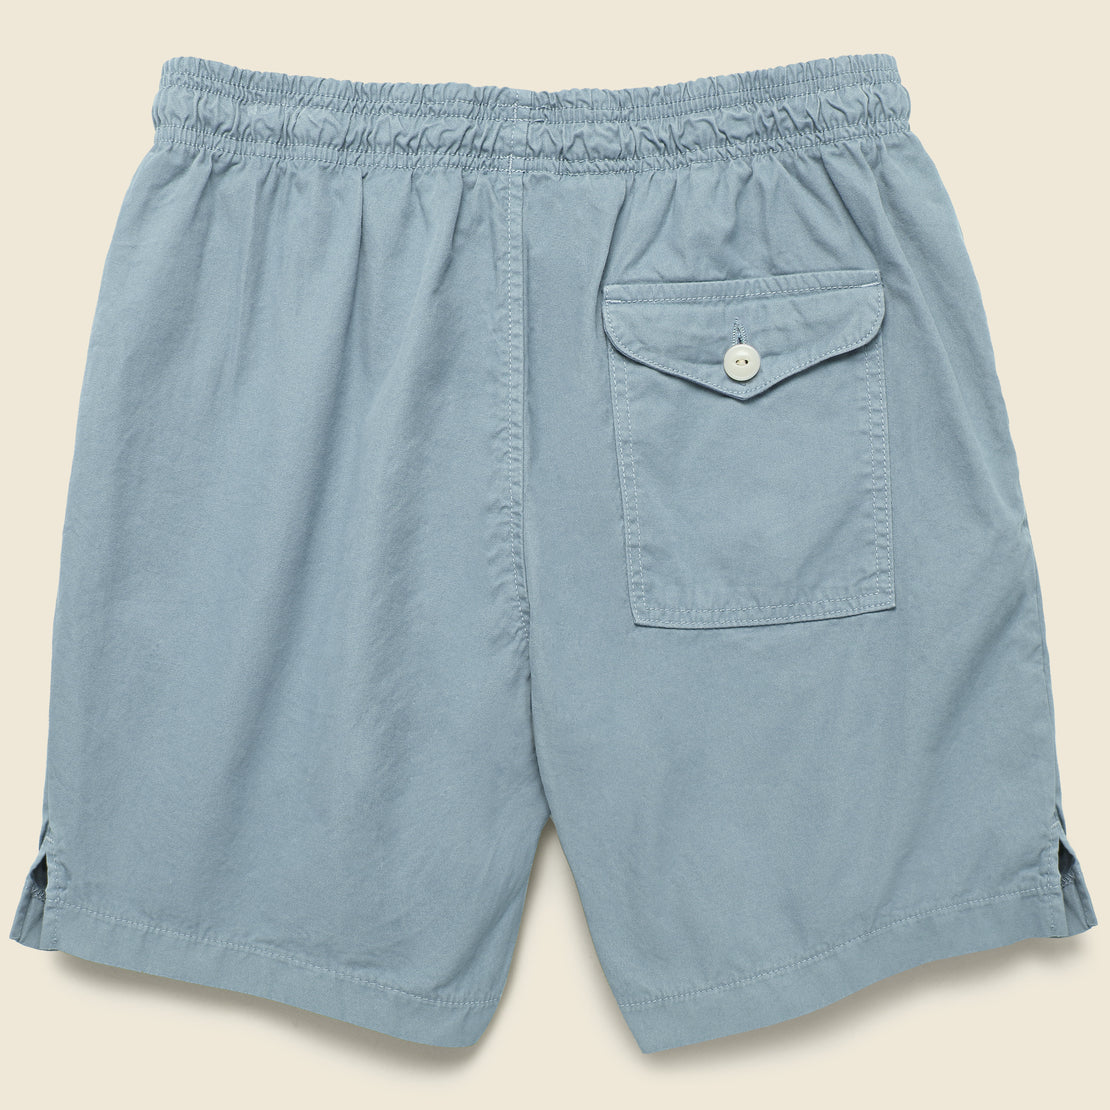 Twill Easy Short - Surf - Save Khaki - STAG Provisions - Shorts - Lounge